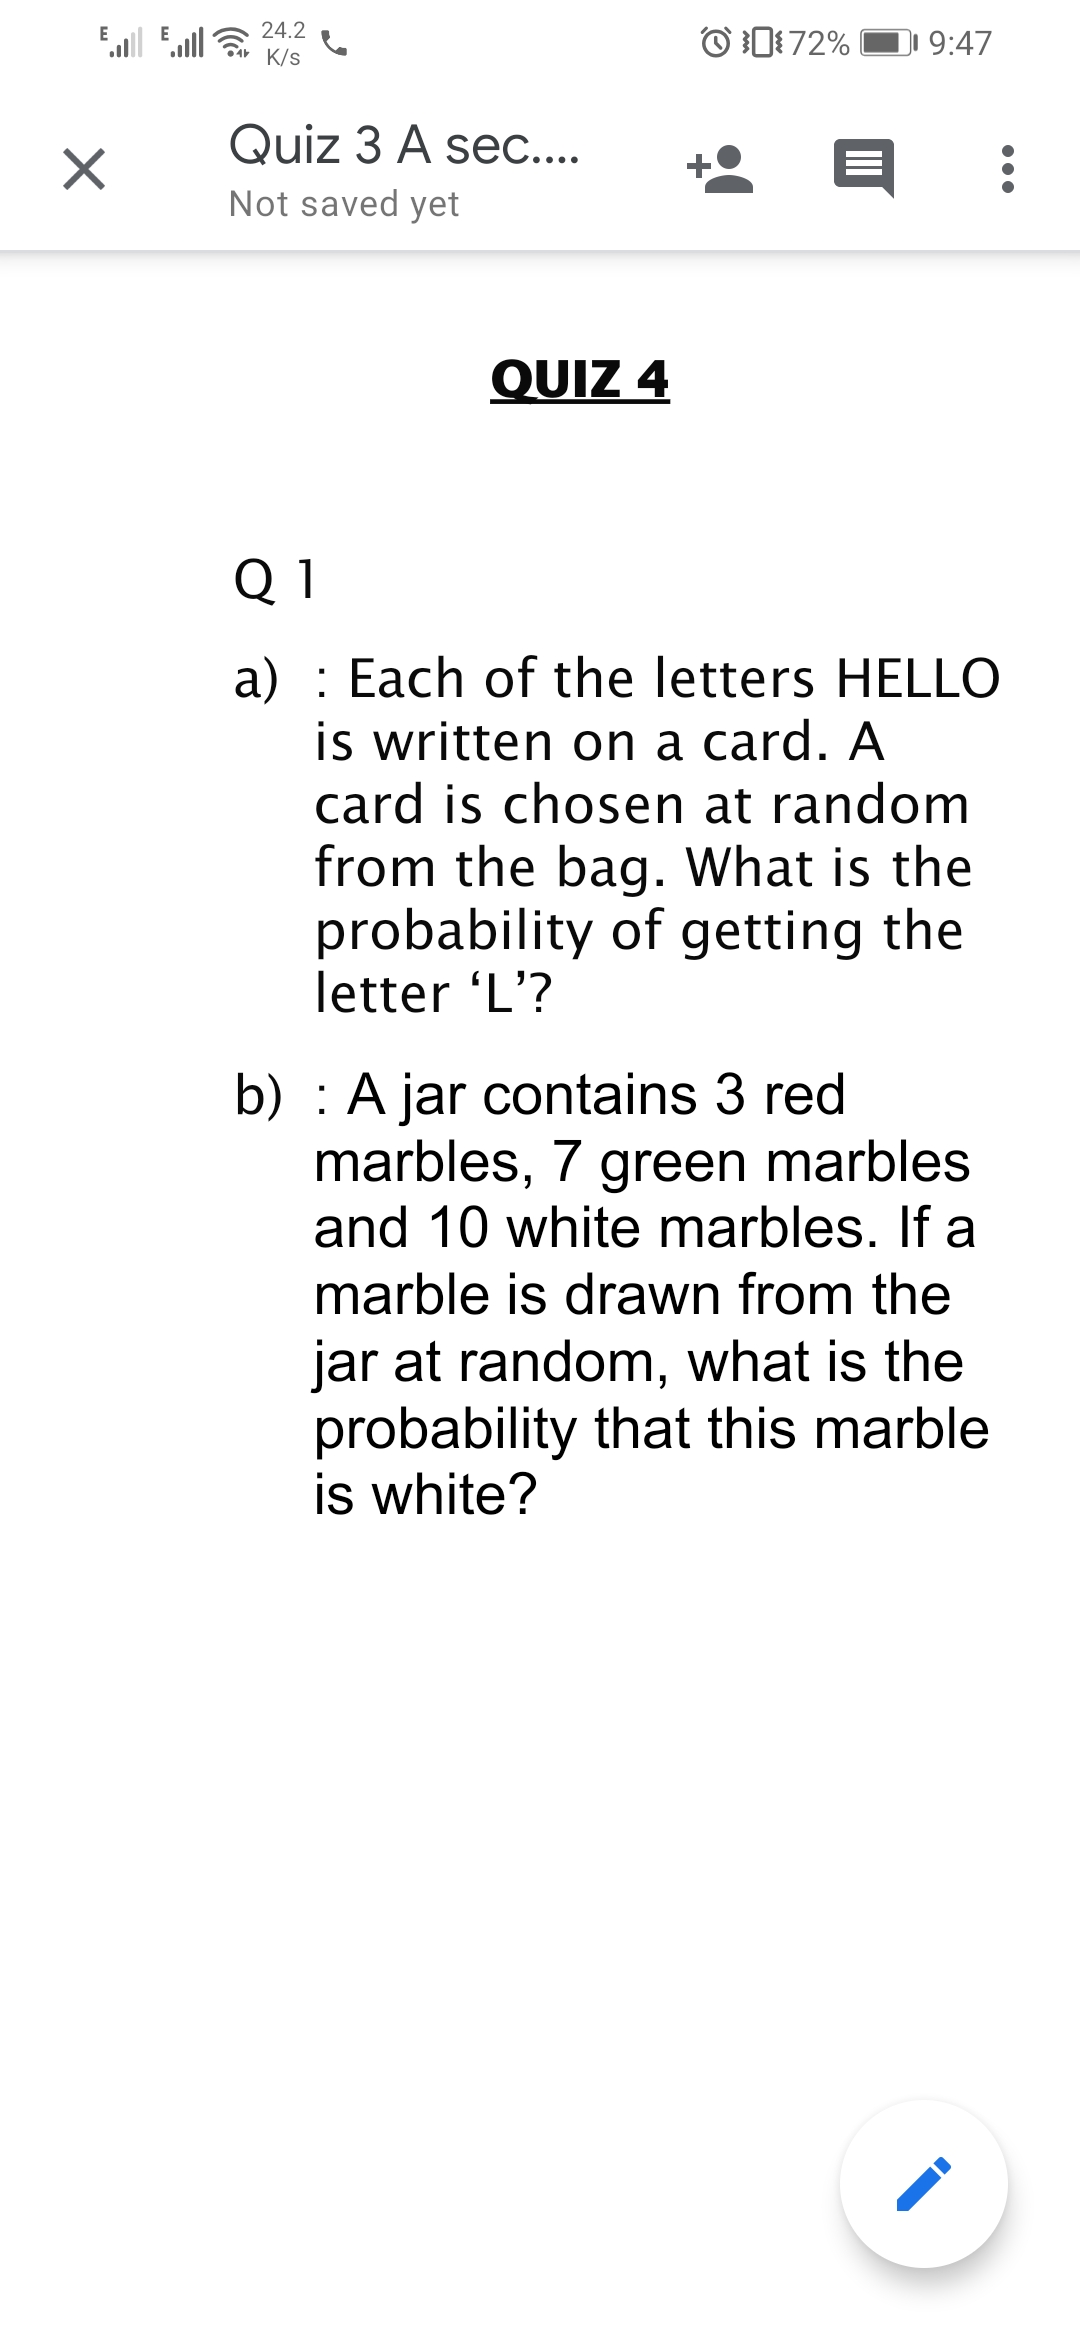 24.2
Ell
Eull
O D72%
DI 9:47
K/s
Quiz 3 A sec....
Not saved yet
QUIZ 4
Q 1
a) : Each of the letters HELLO
is written on a card. A
card is chosen at random
from the bag. What is the
probability of getting the
letter 'L'?
b) : A jar contains 3 red
marbles, 7 green marbles
and 10 white marbles. If a
marble is drawn from the
jar at random, what is the
probability that this marble
is white?
